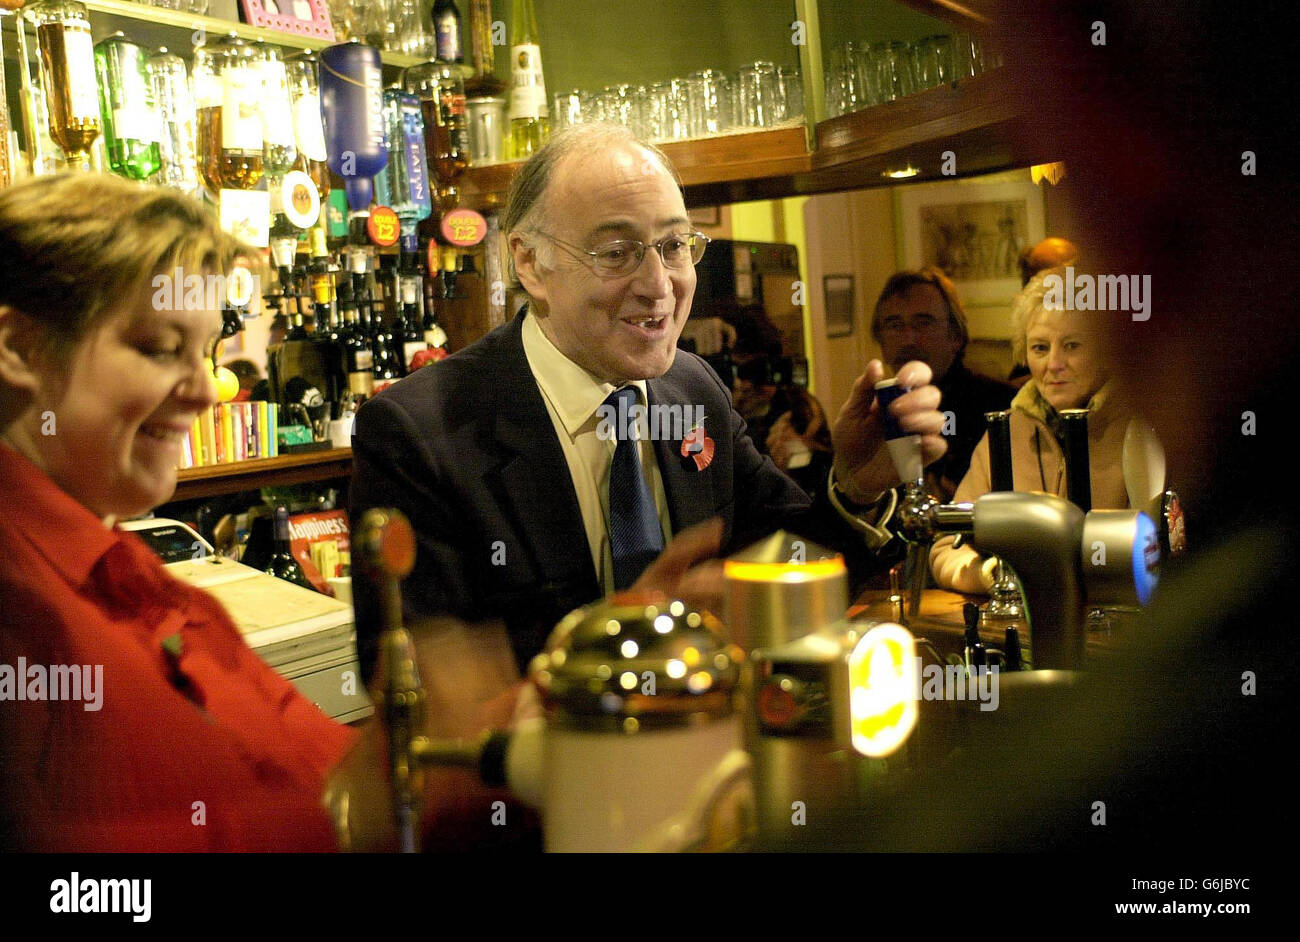 New Conservative Party leader Michael Howard pulls a pint from behind the bar at the Kings Head in Hythe. Mr Howard was this weekend putting the finishing touches to his shadow cabinet following his unopposed election on Thursday. Stock Photo